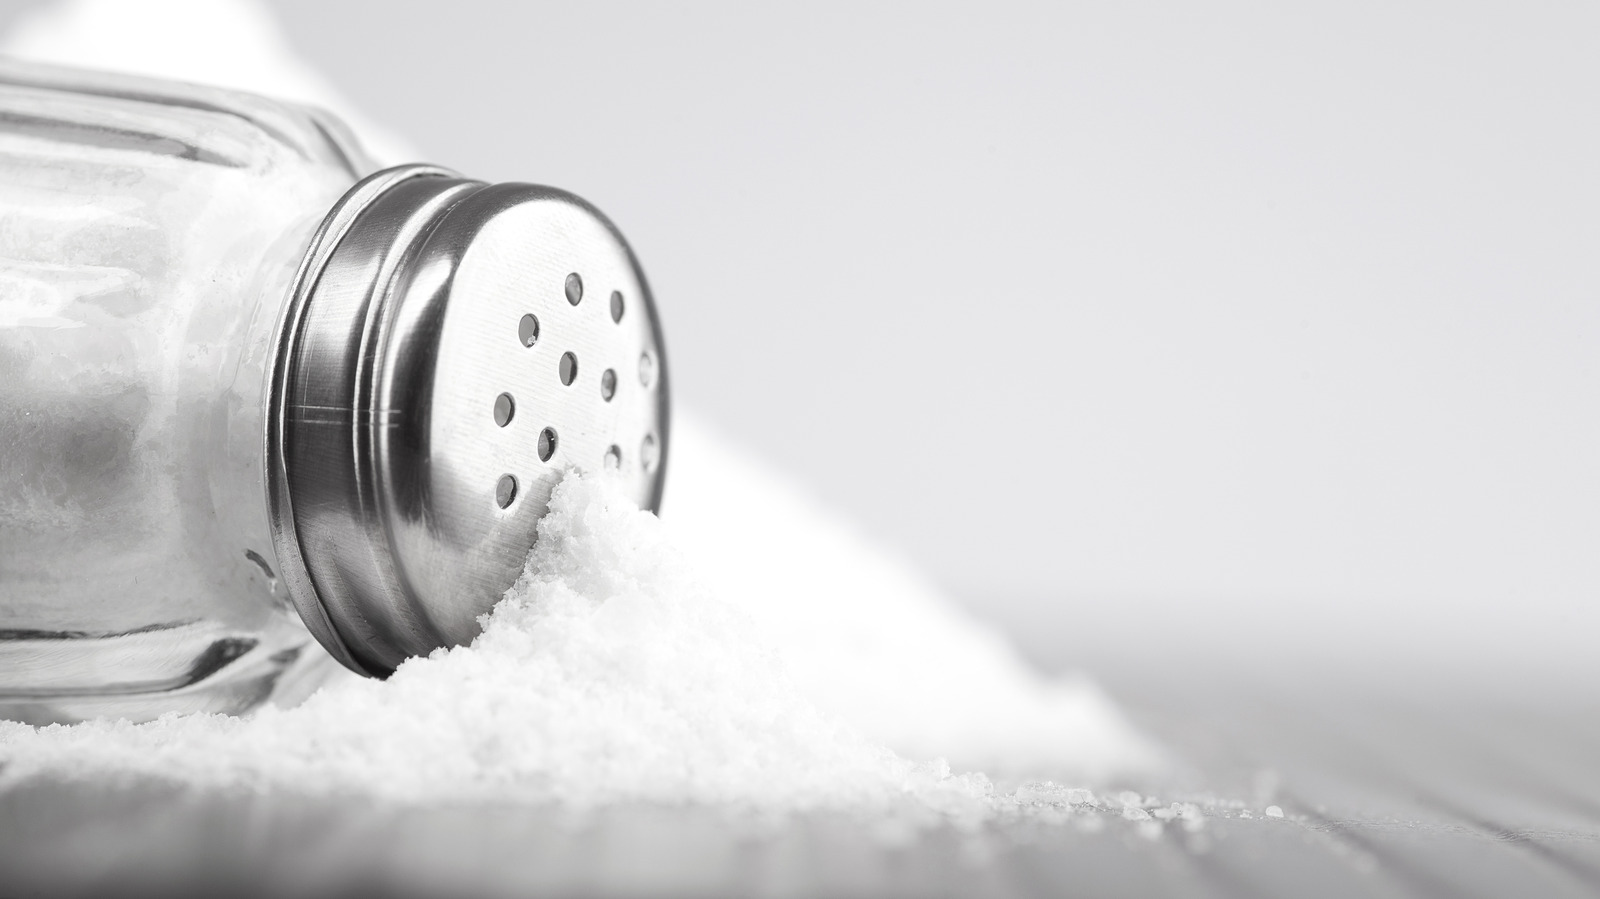 https://www.tastingtable.com/img/gallery/the-fda-proposed-new-salt-substitute-rules-to-improve-nutrition/l-intro-1679682516.jpg